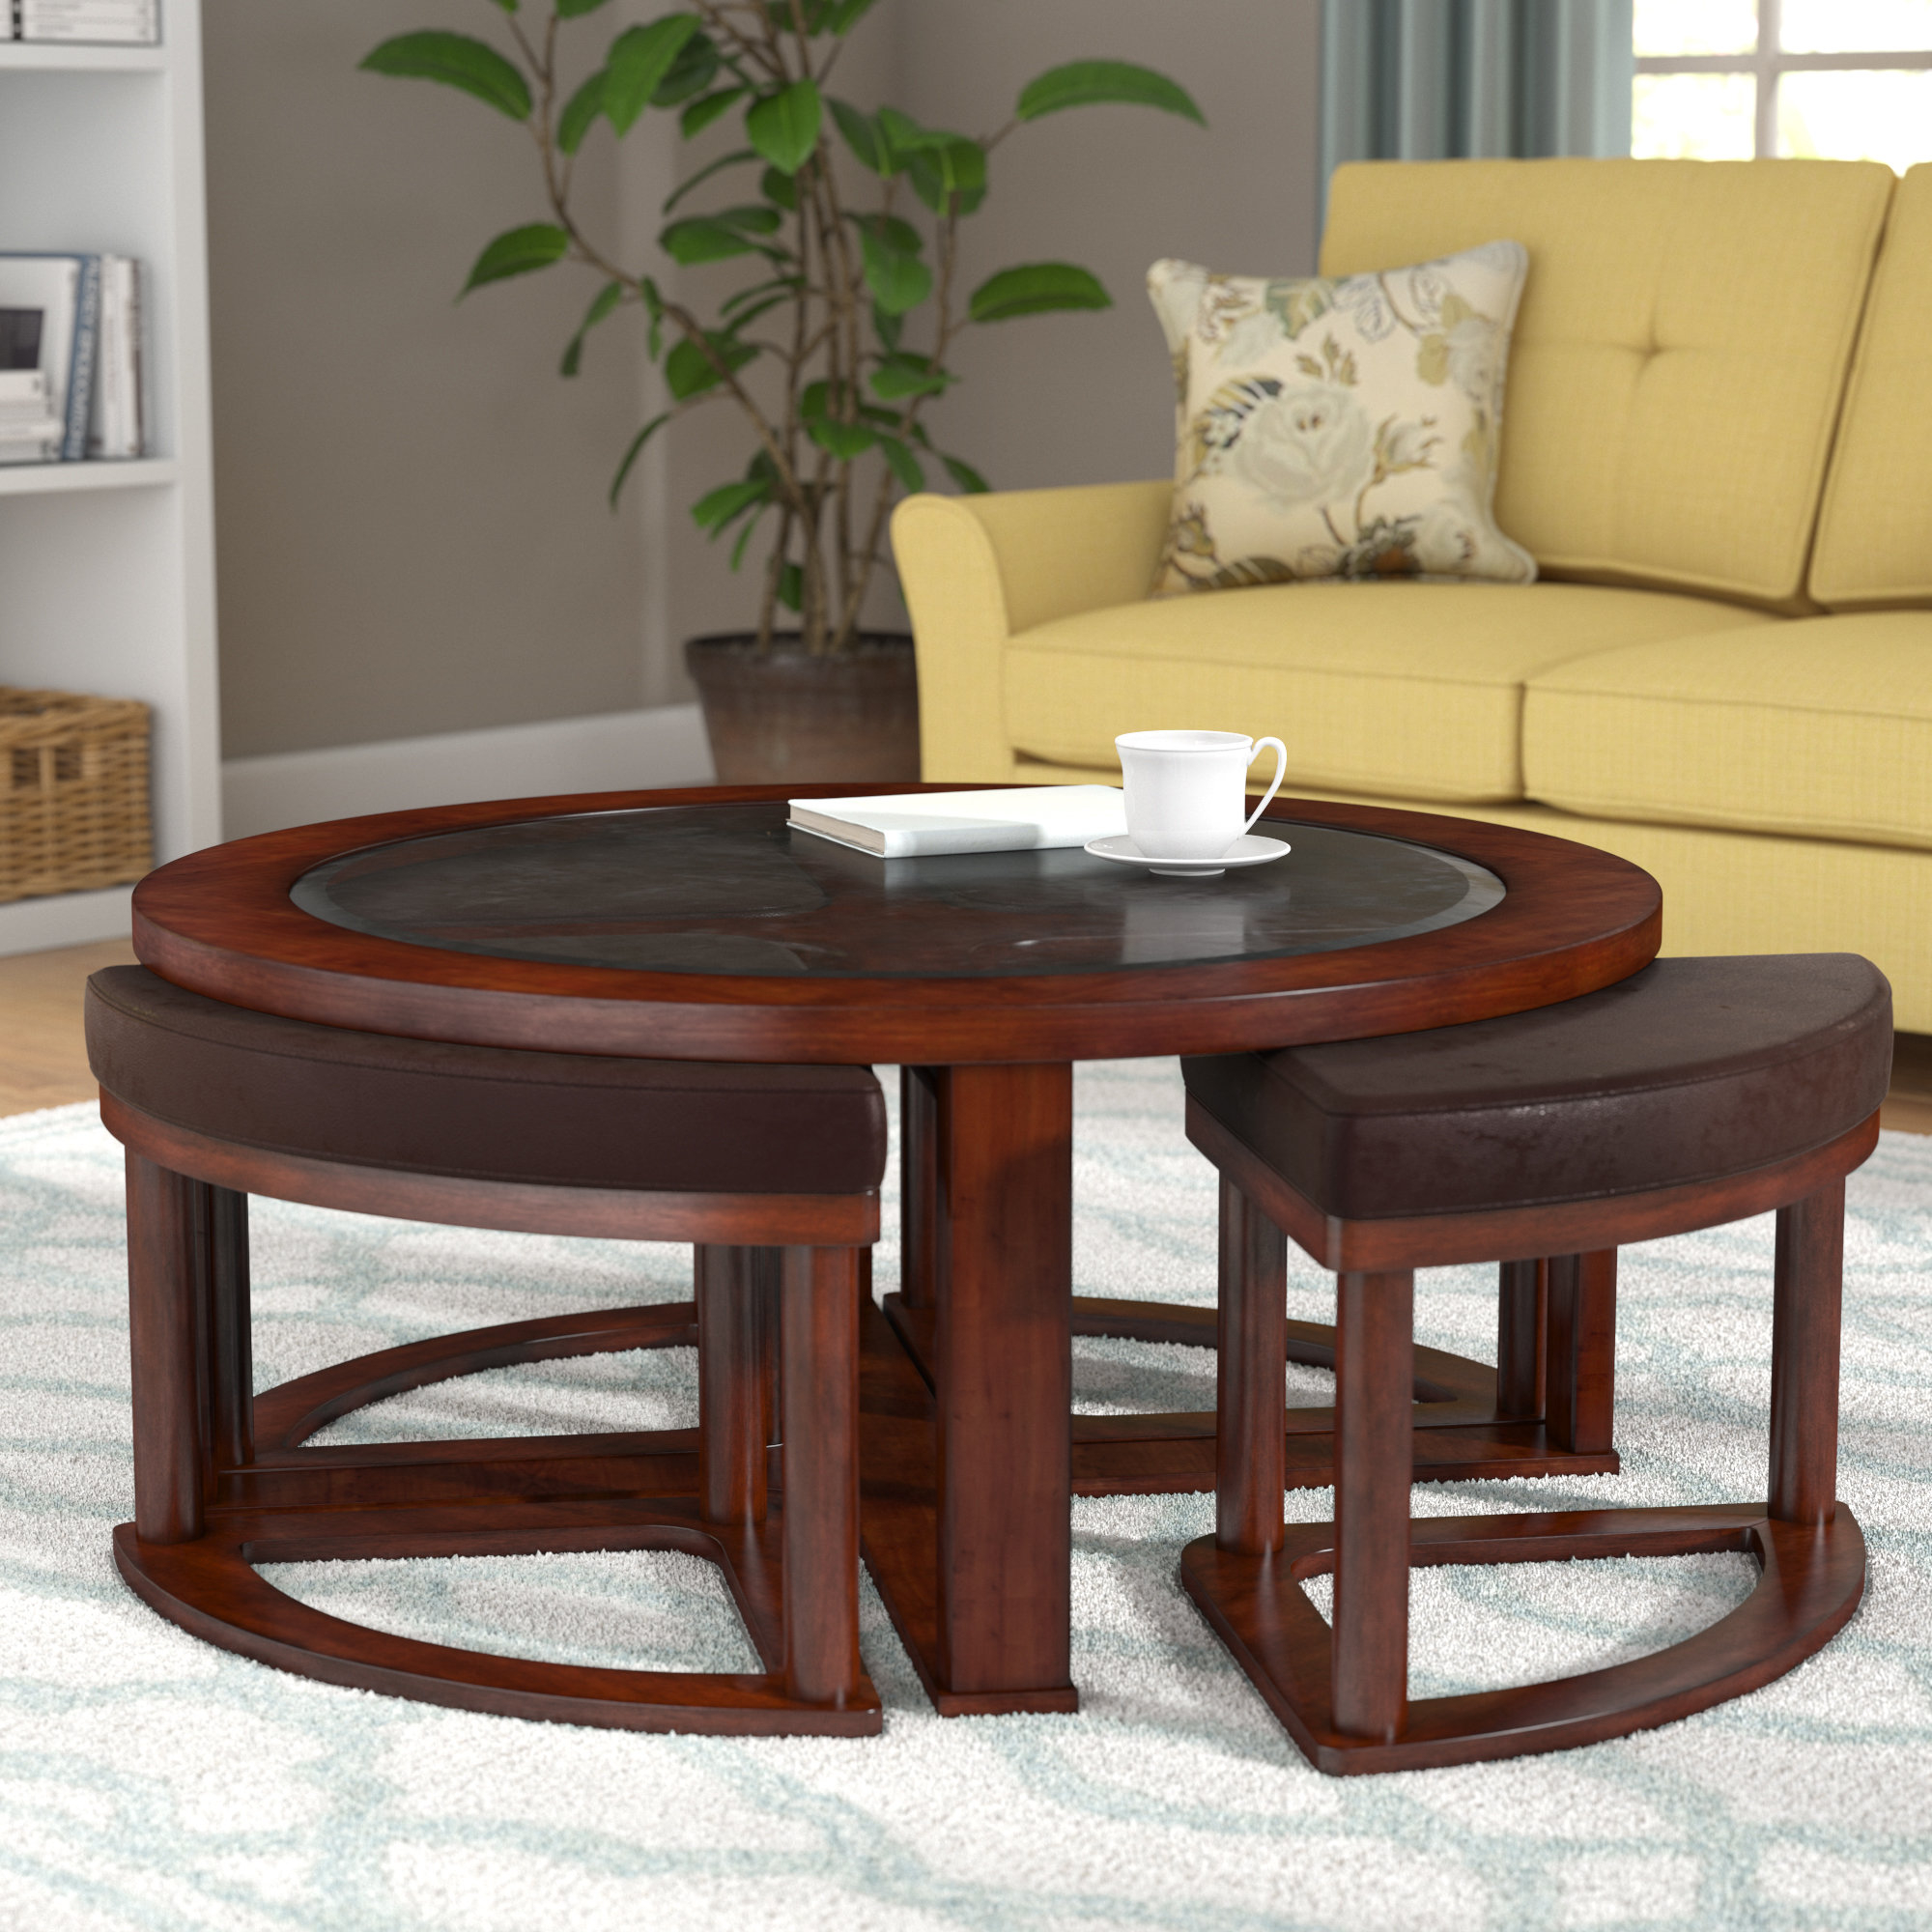 Wayfair Dar Home Co Eastin Coffee Table With Nested Stools inside sizing 2000 X 2000